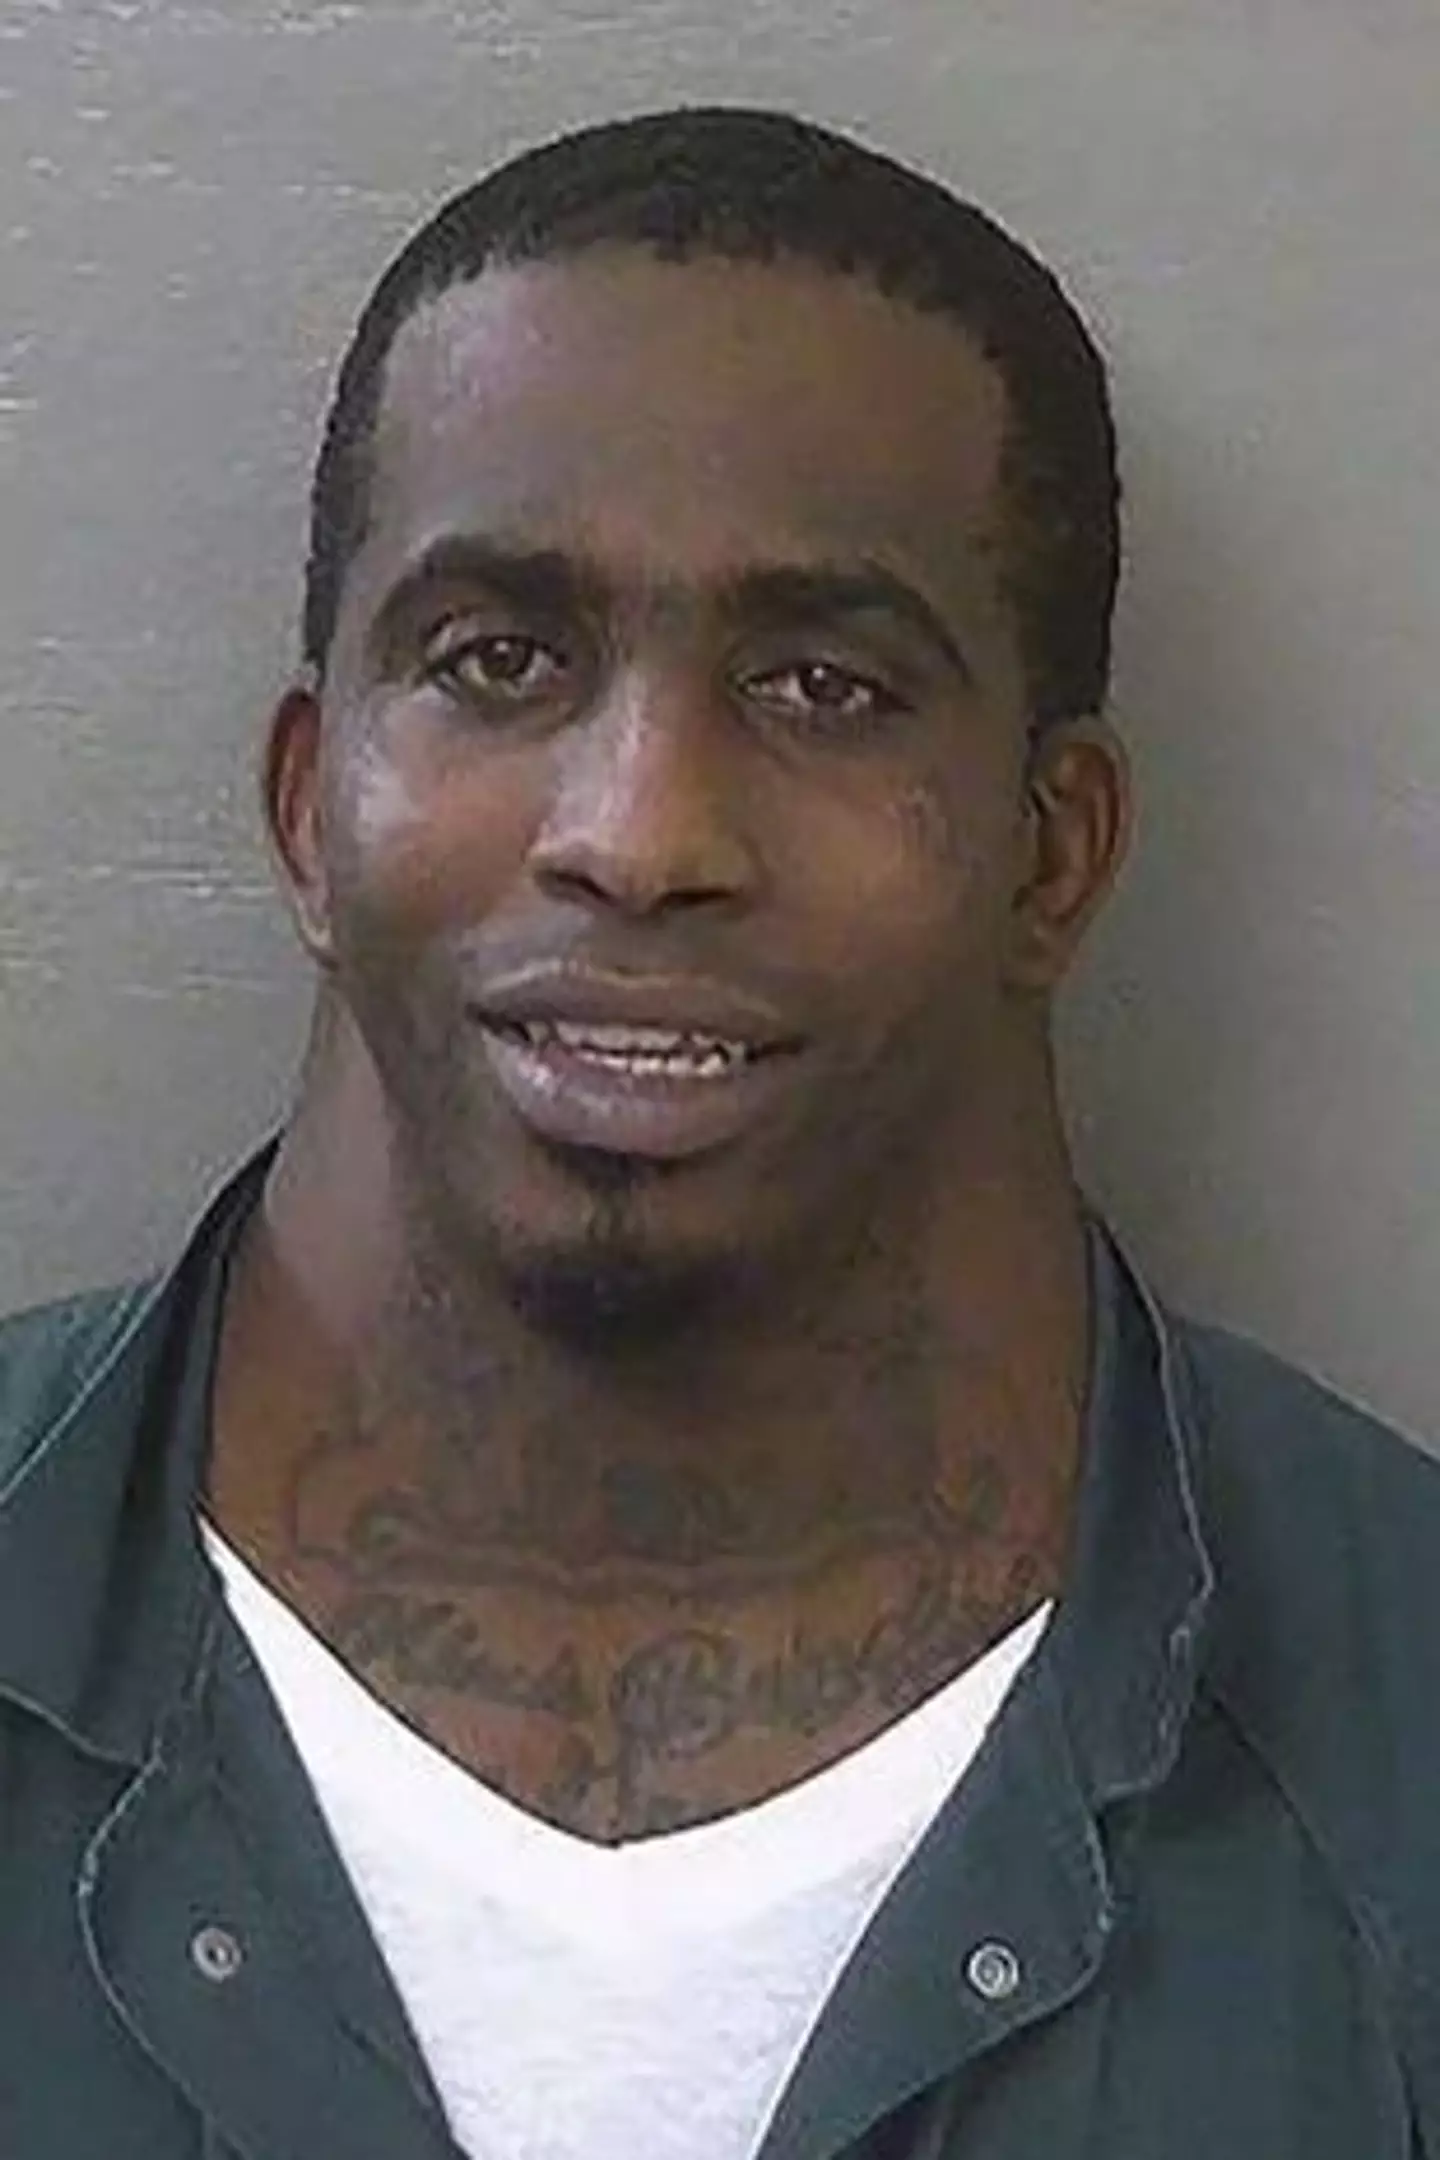 Charles 'Wide Neck' McDowell has been arrested again. Credit:Escambia County Sheriff's Office